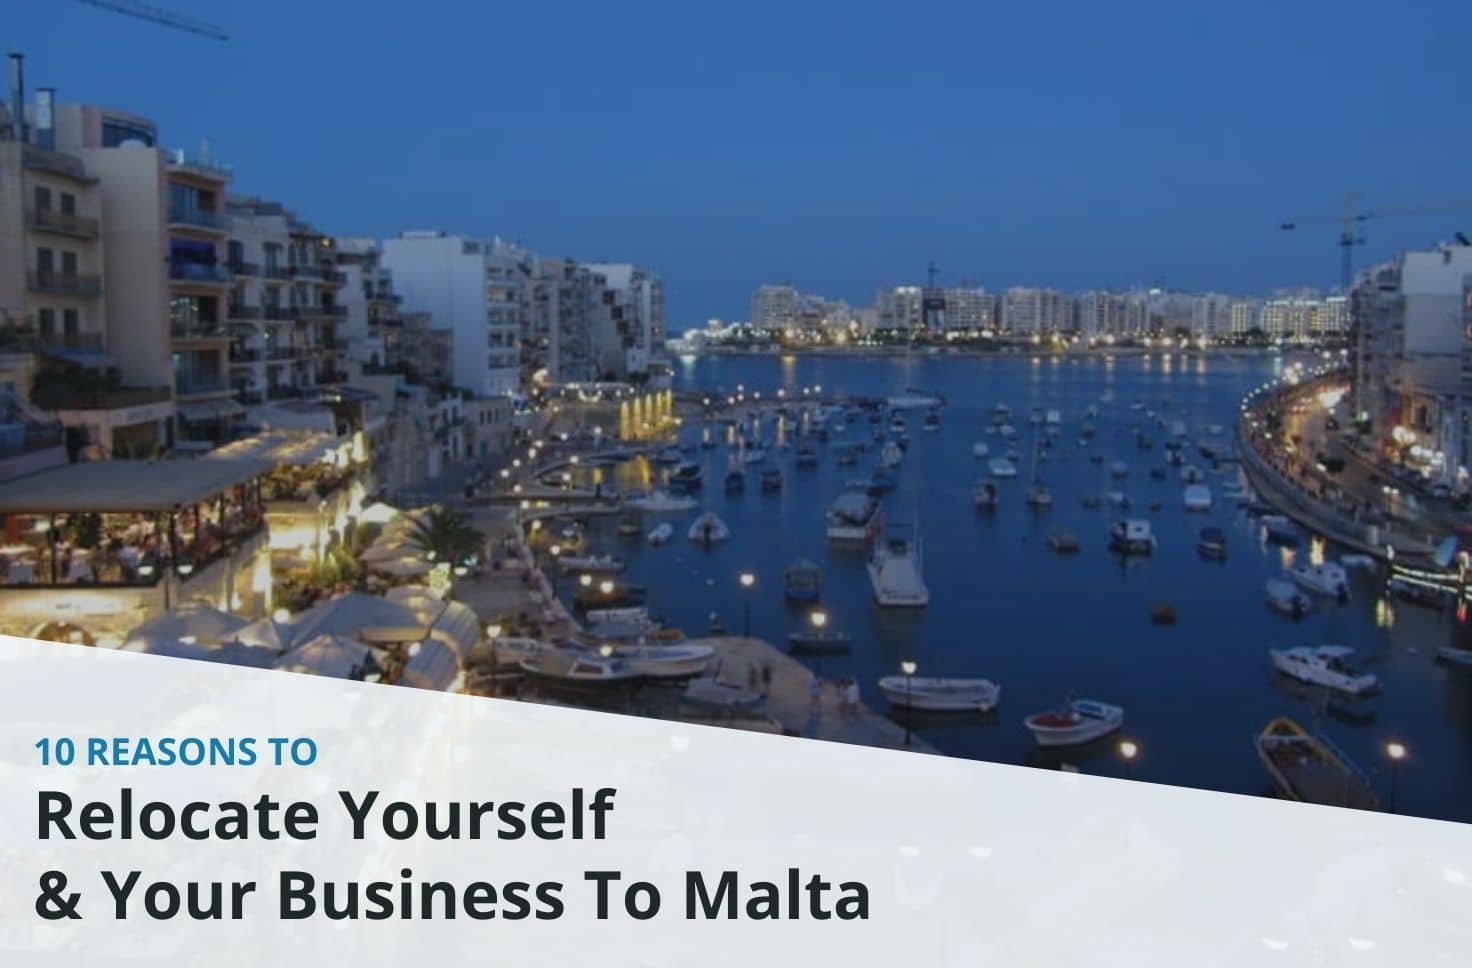 10-reasons-to-relocate-to-malta